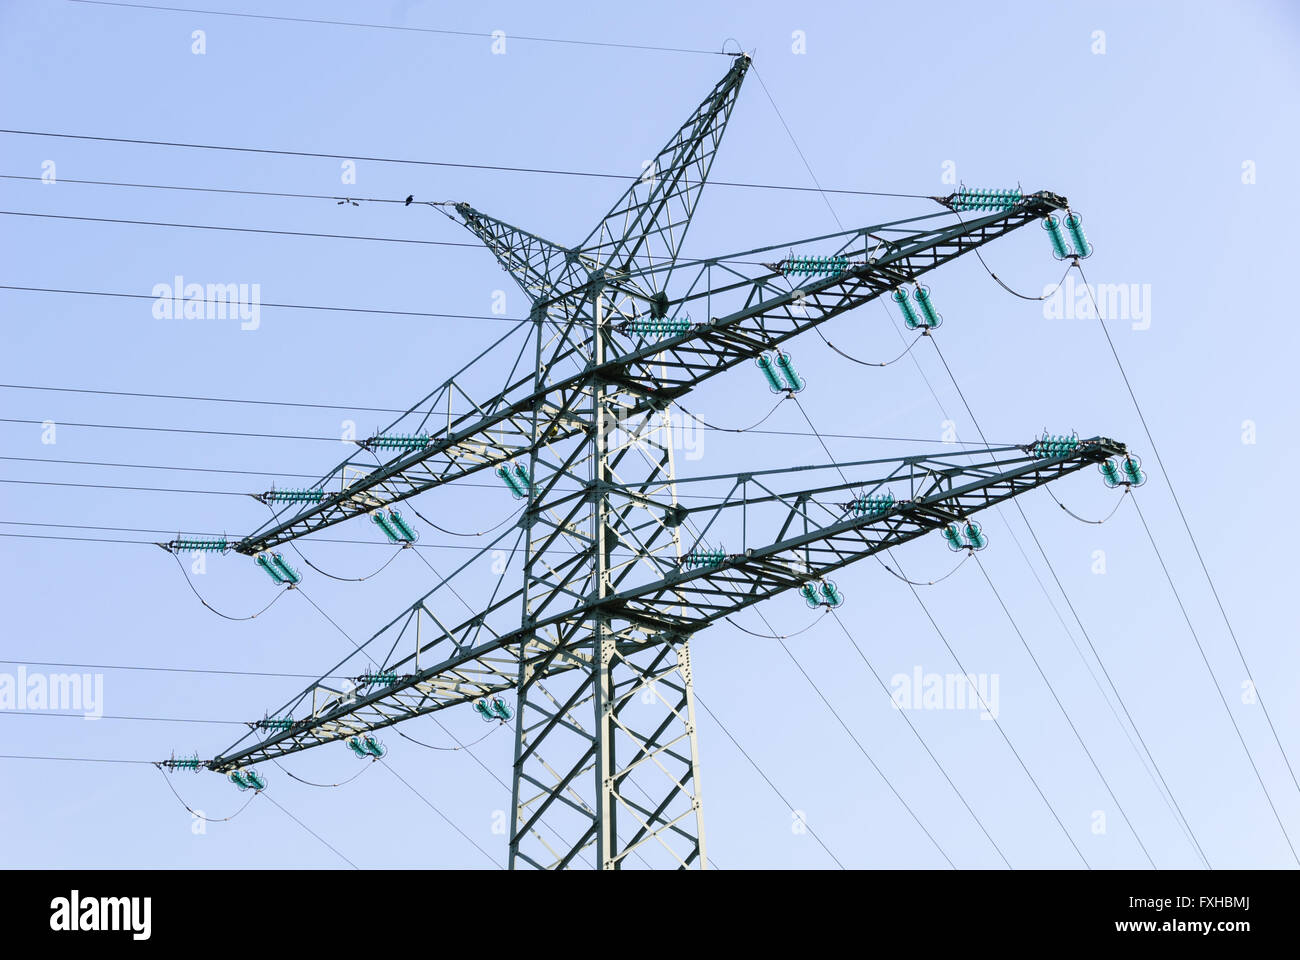 Tension tower with traverses of a high-voltage line Stock Photo